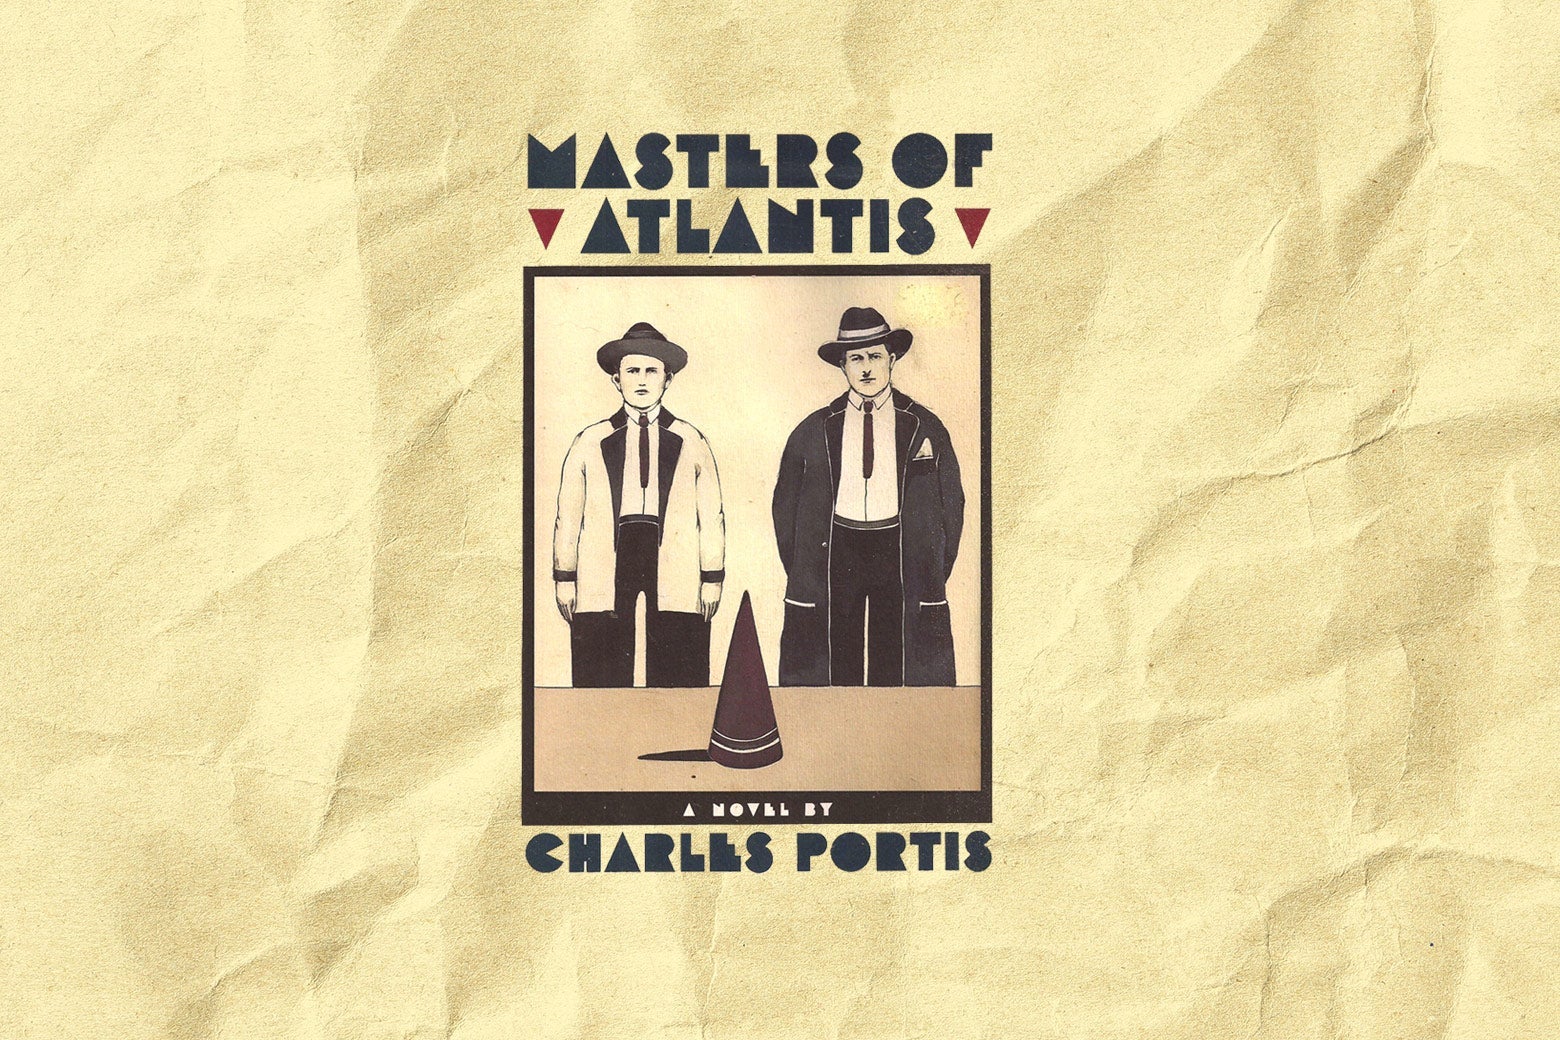 The cover of Masters of Atlantis by Charles Portis.